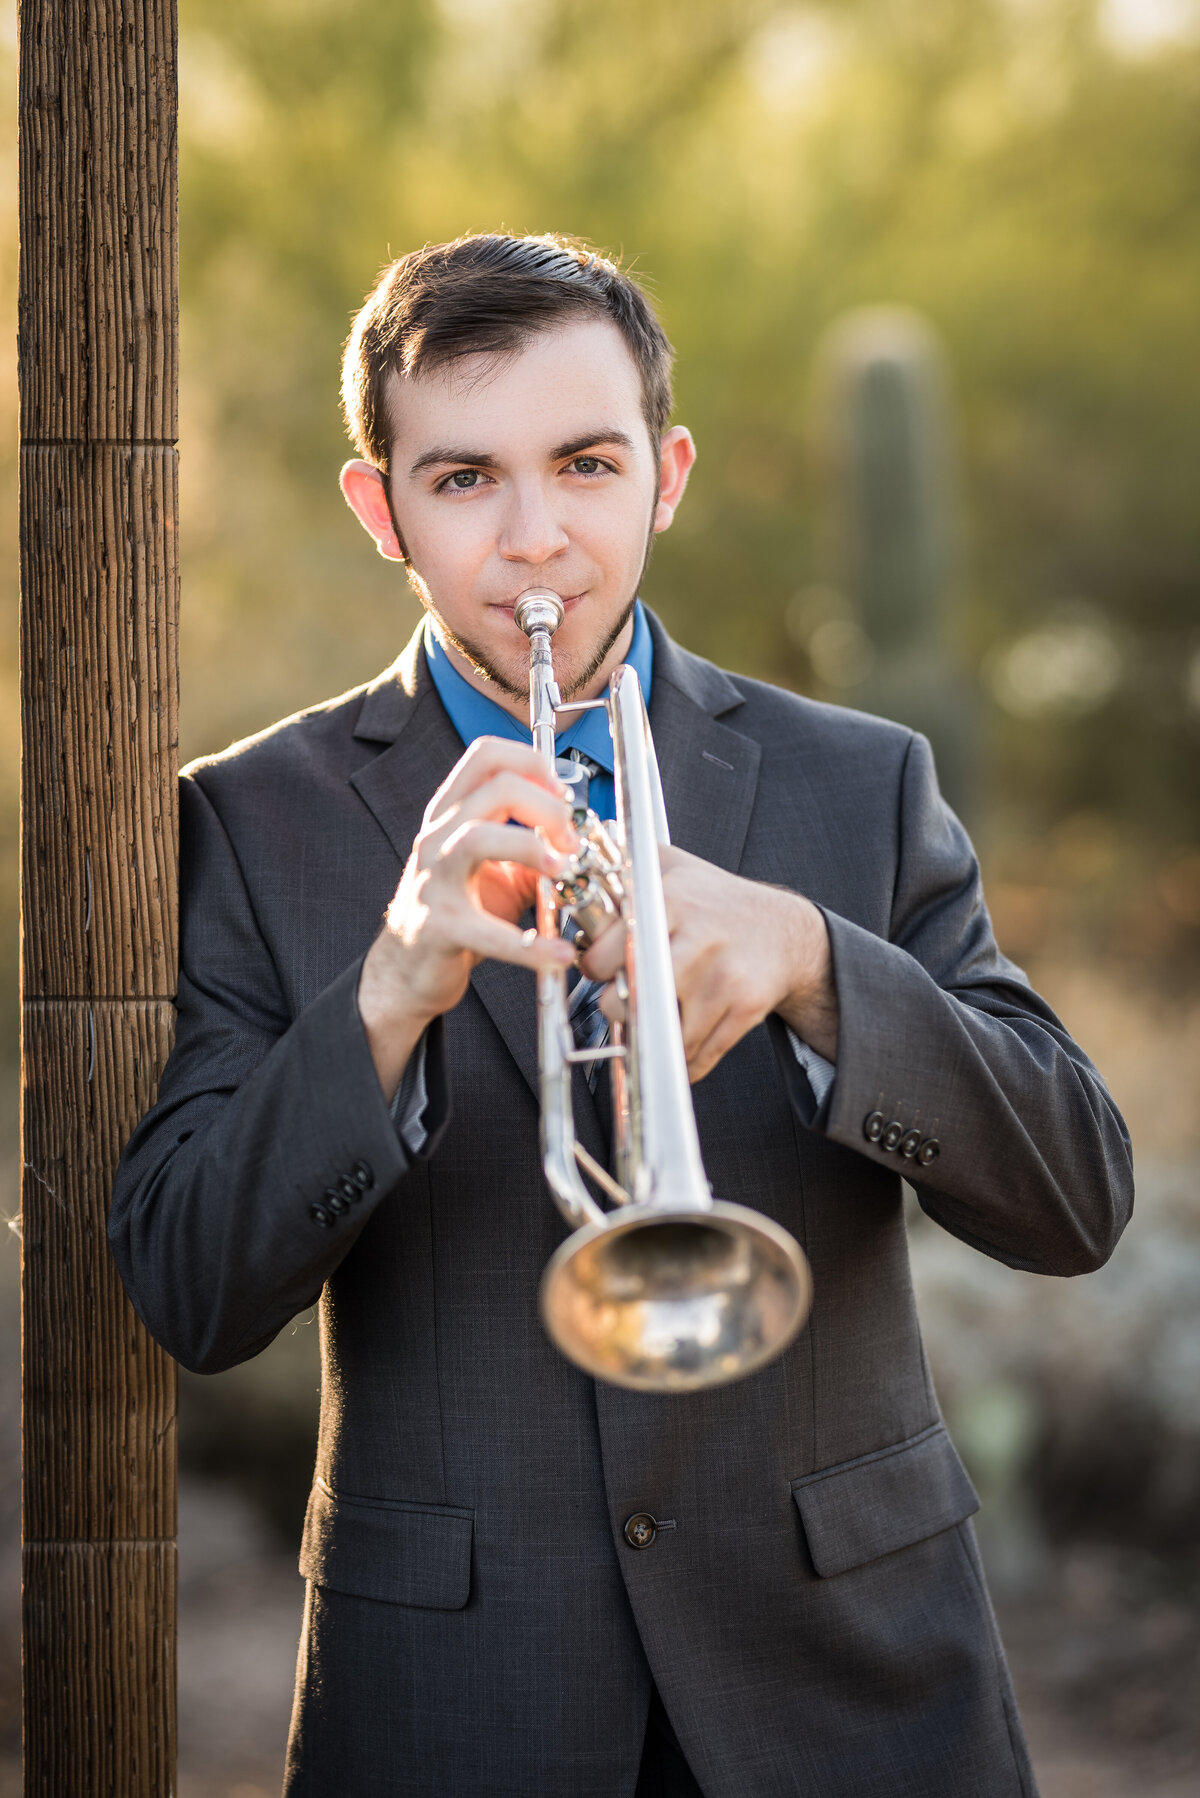 Senior guy wearing a suit and playing the trumpet